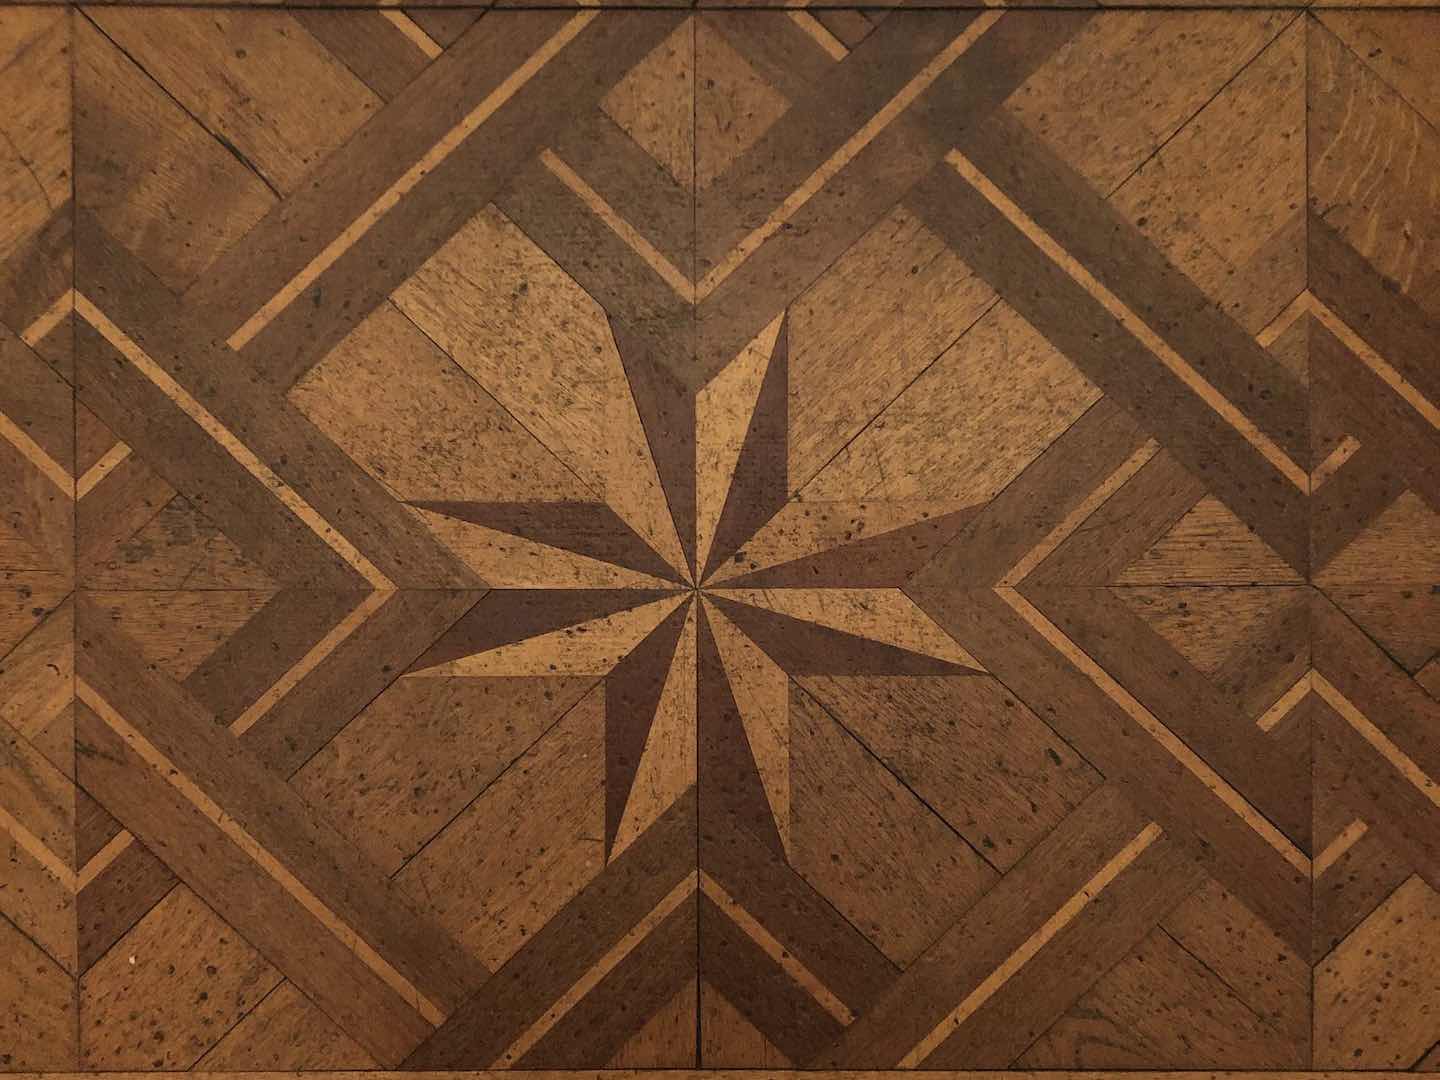 History House's parquet floor designed in the shape of an eight-point star.